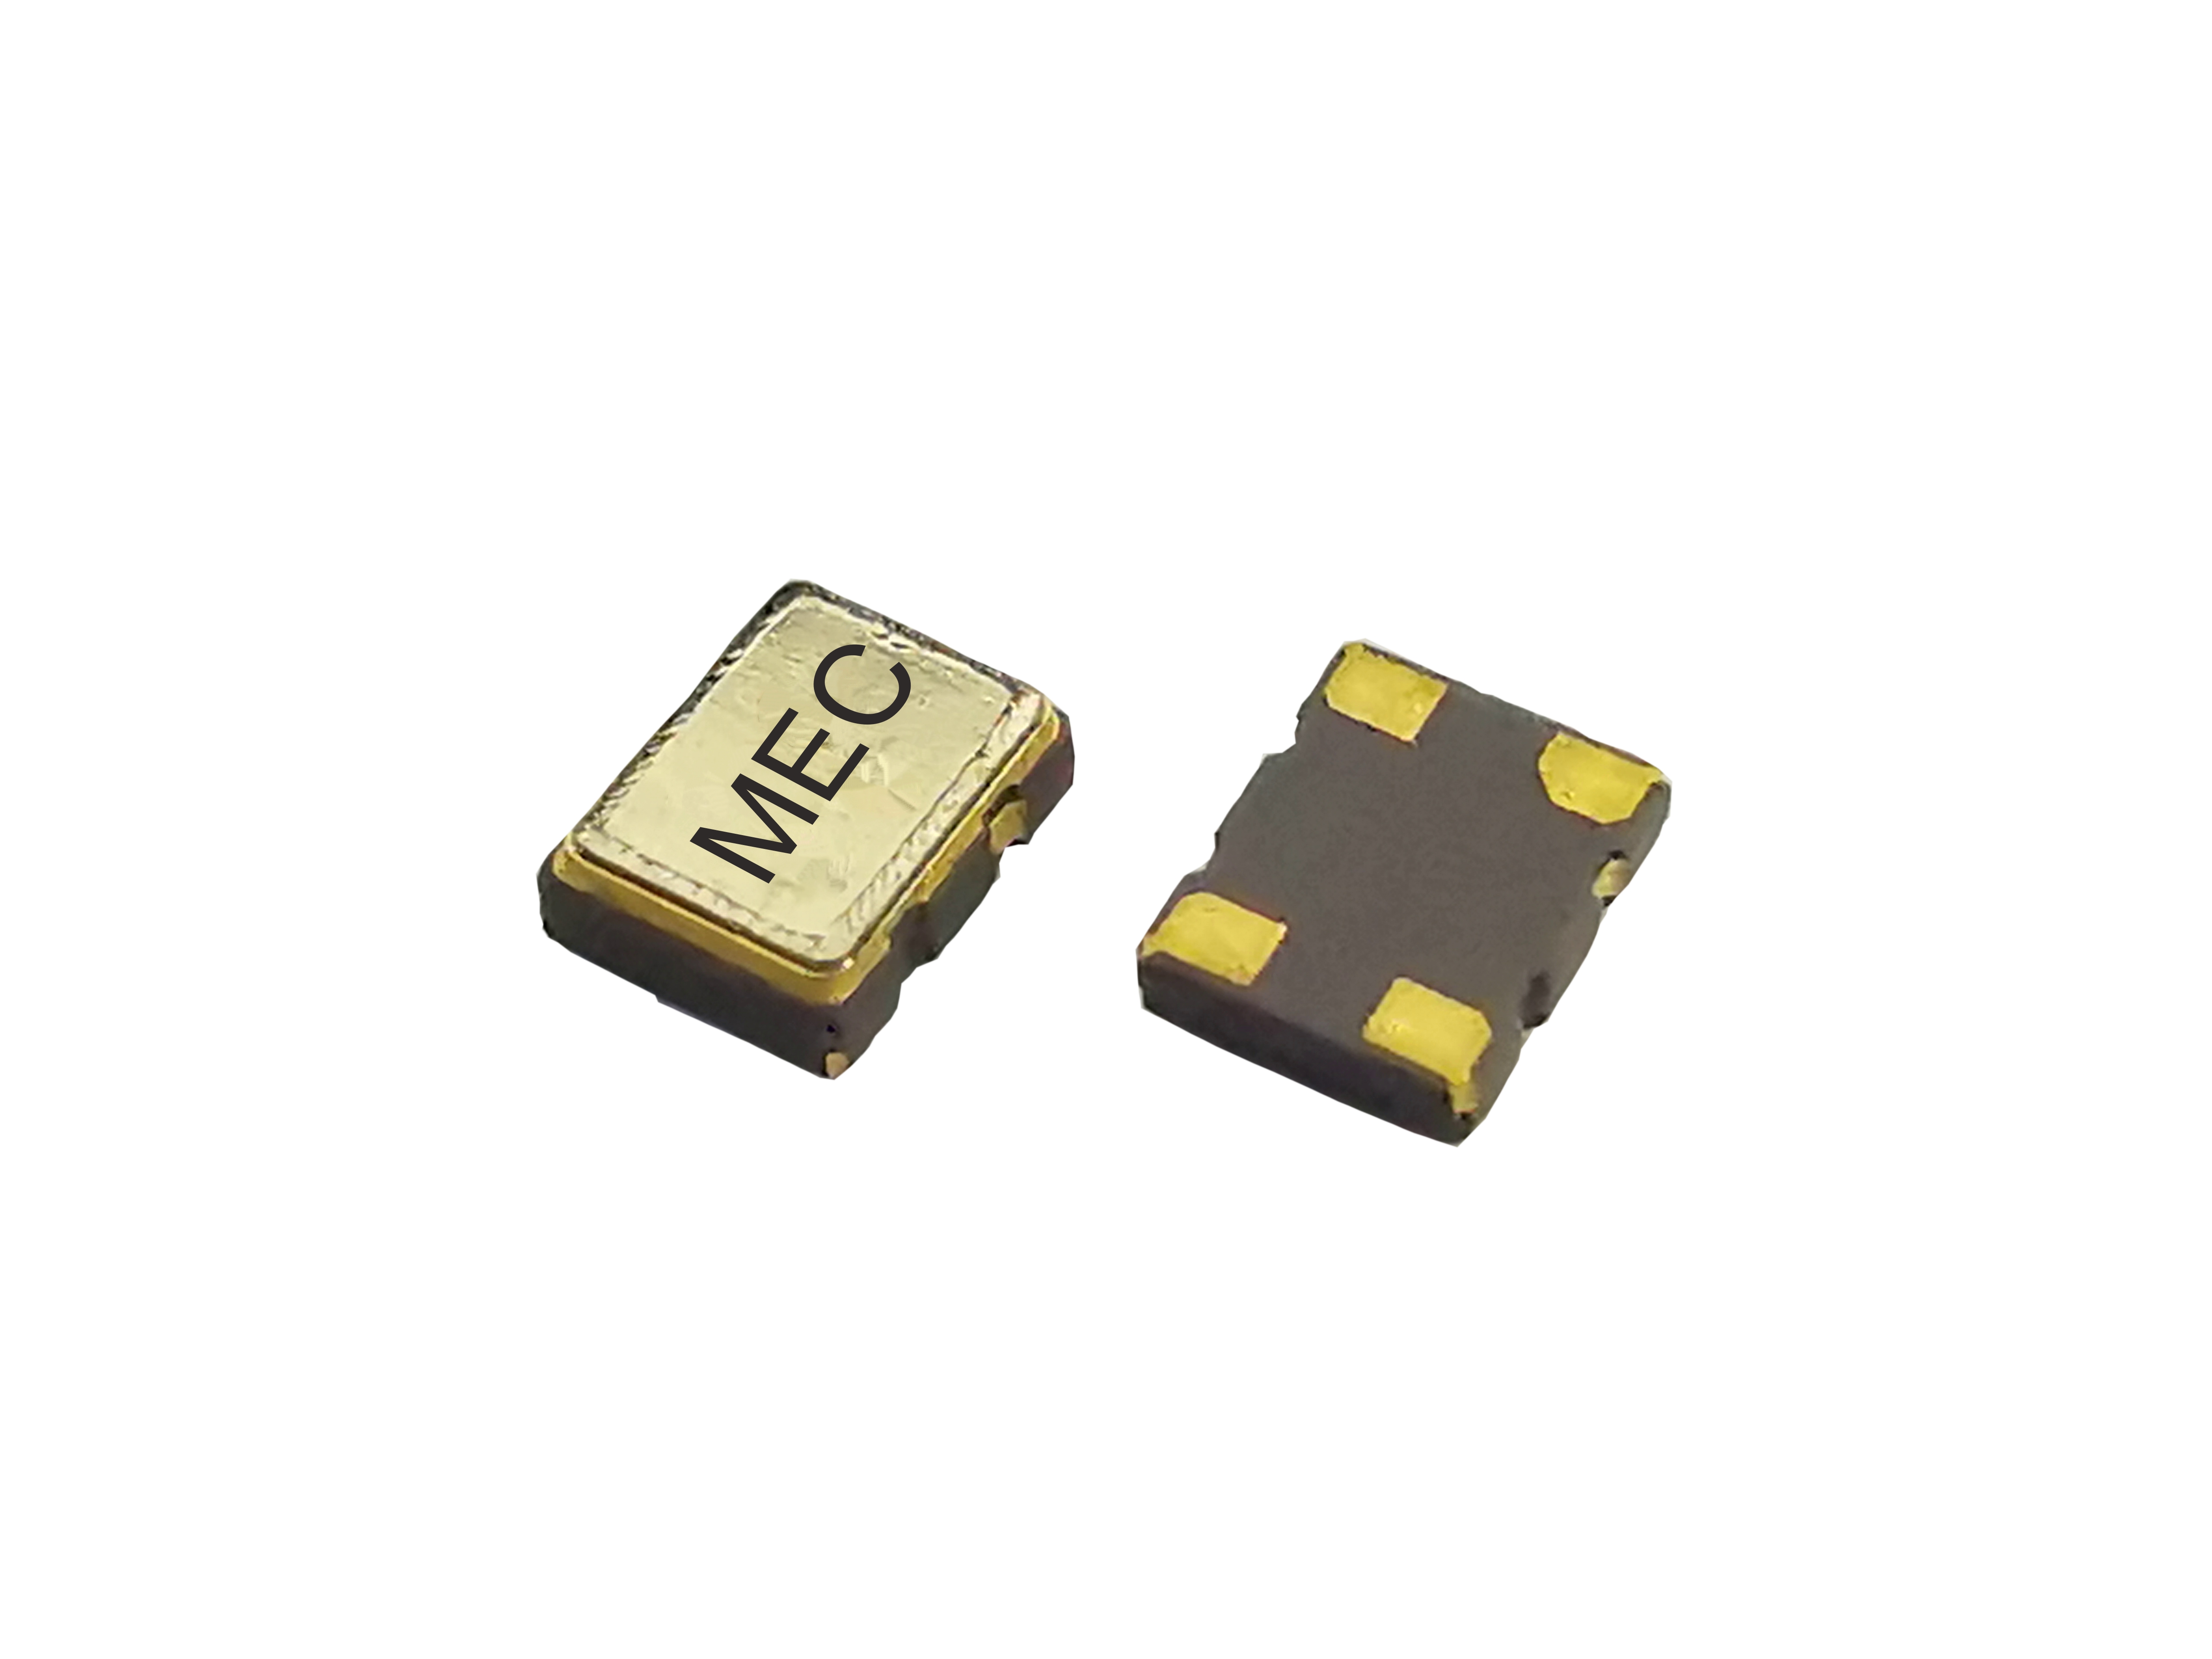 M221T 2520 1.8V Enable/Disable Function CMOS Temperature Compensated Crystal Oscillator